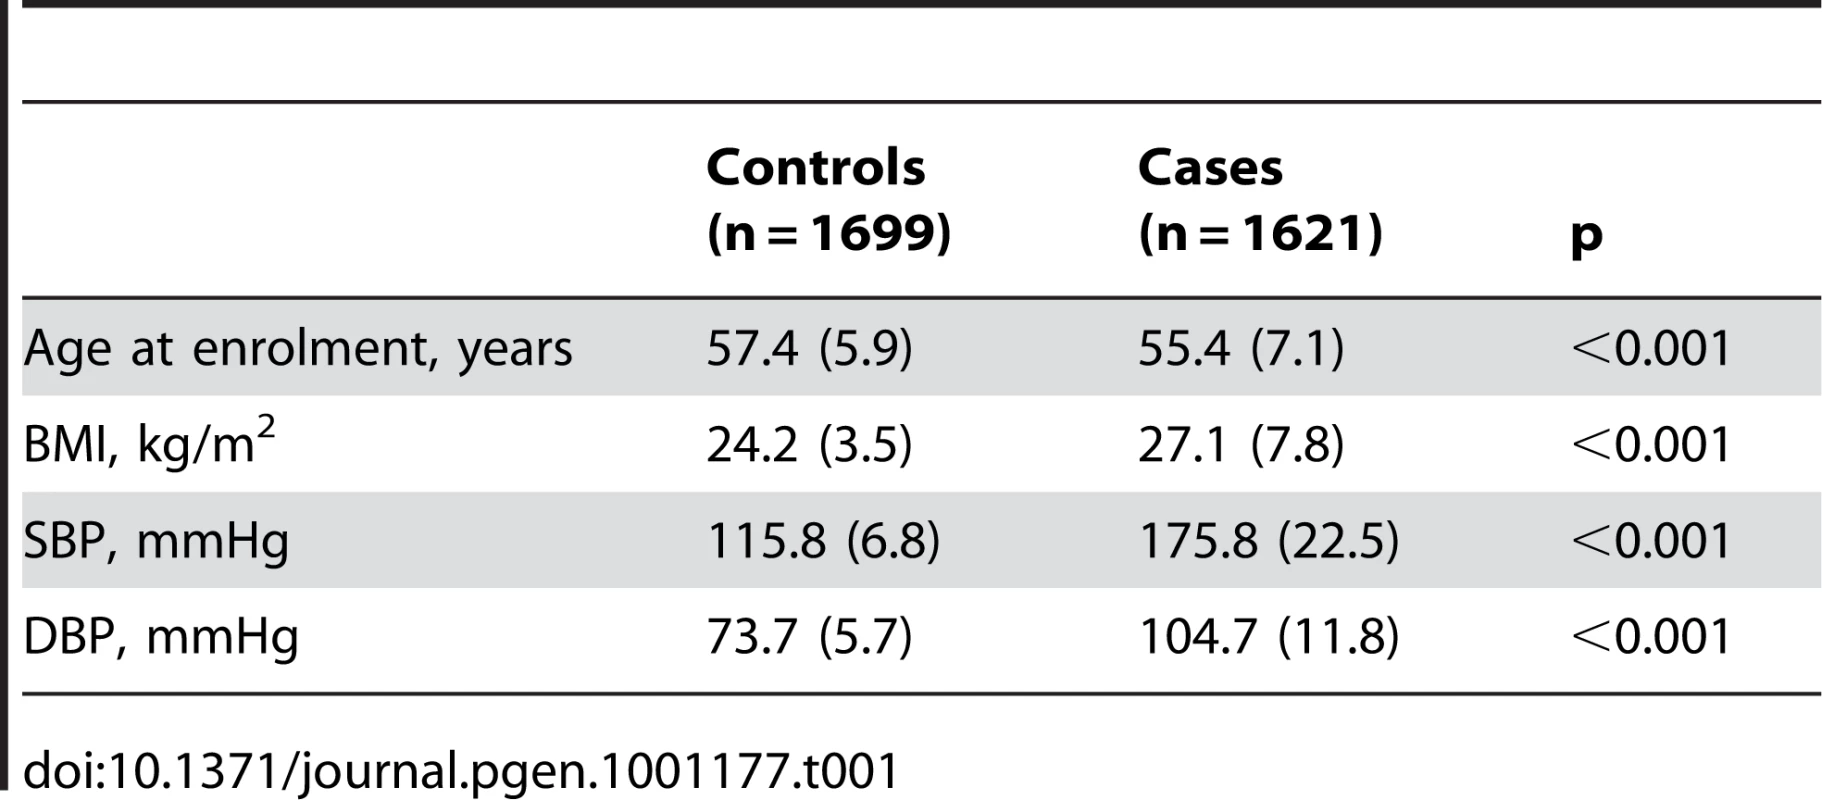 Demographic characteristics of the discovery case control population.